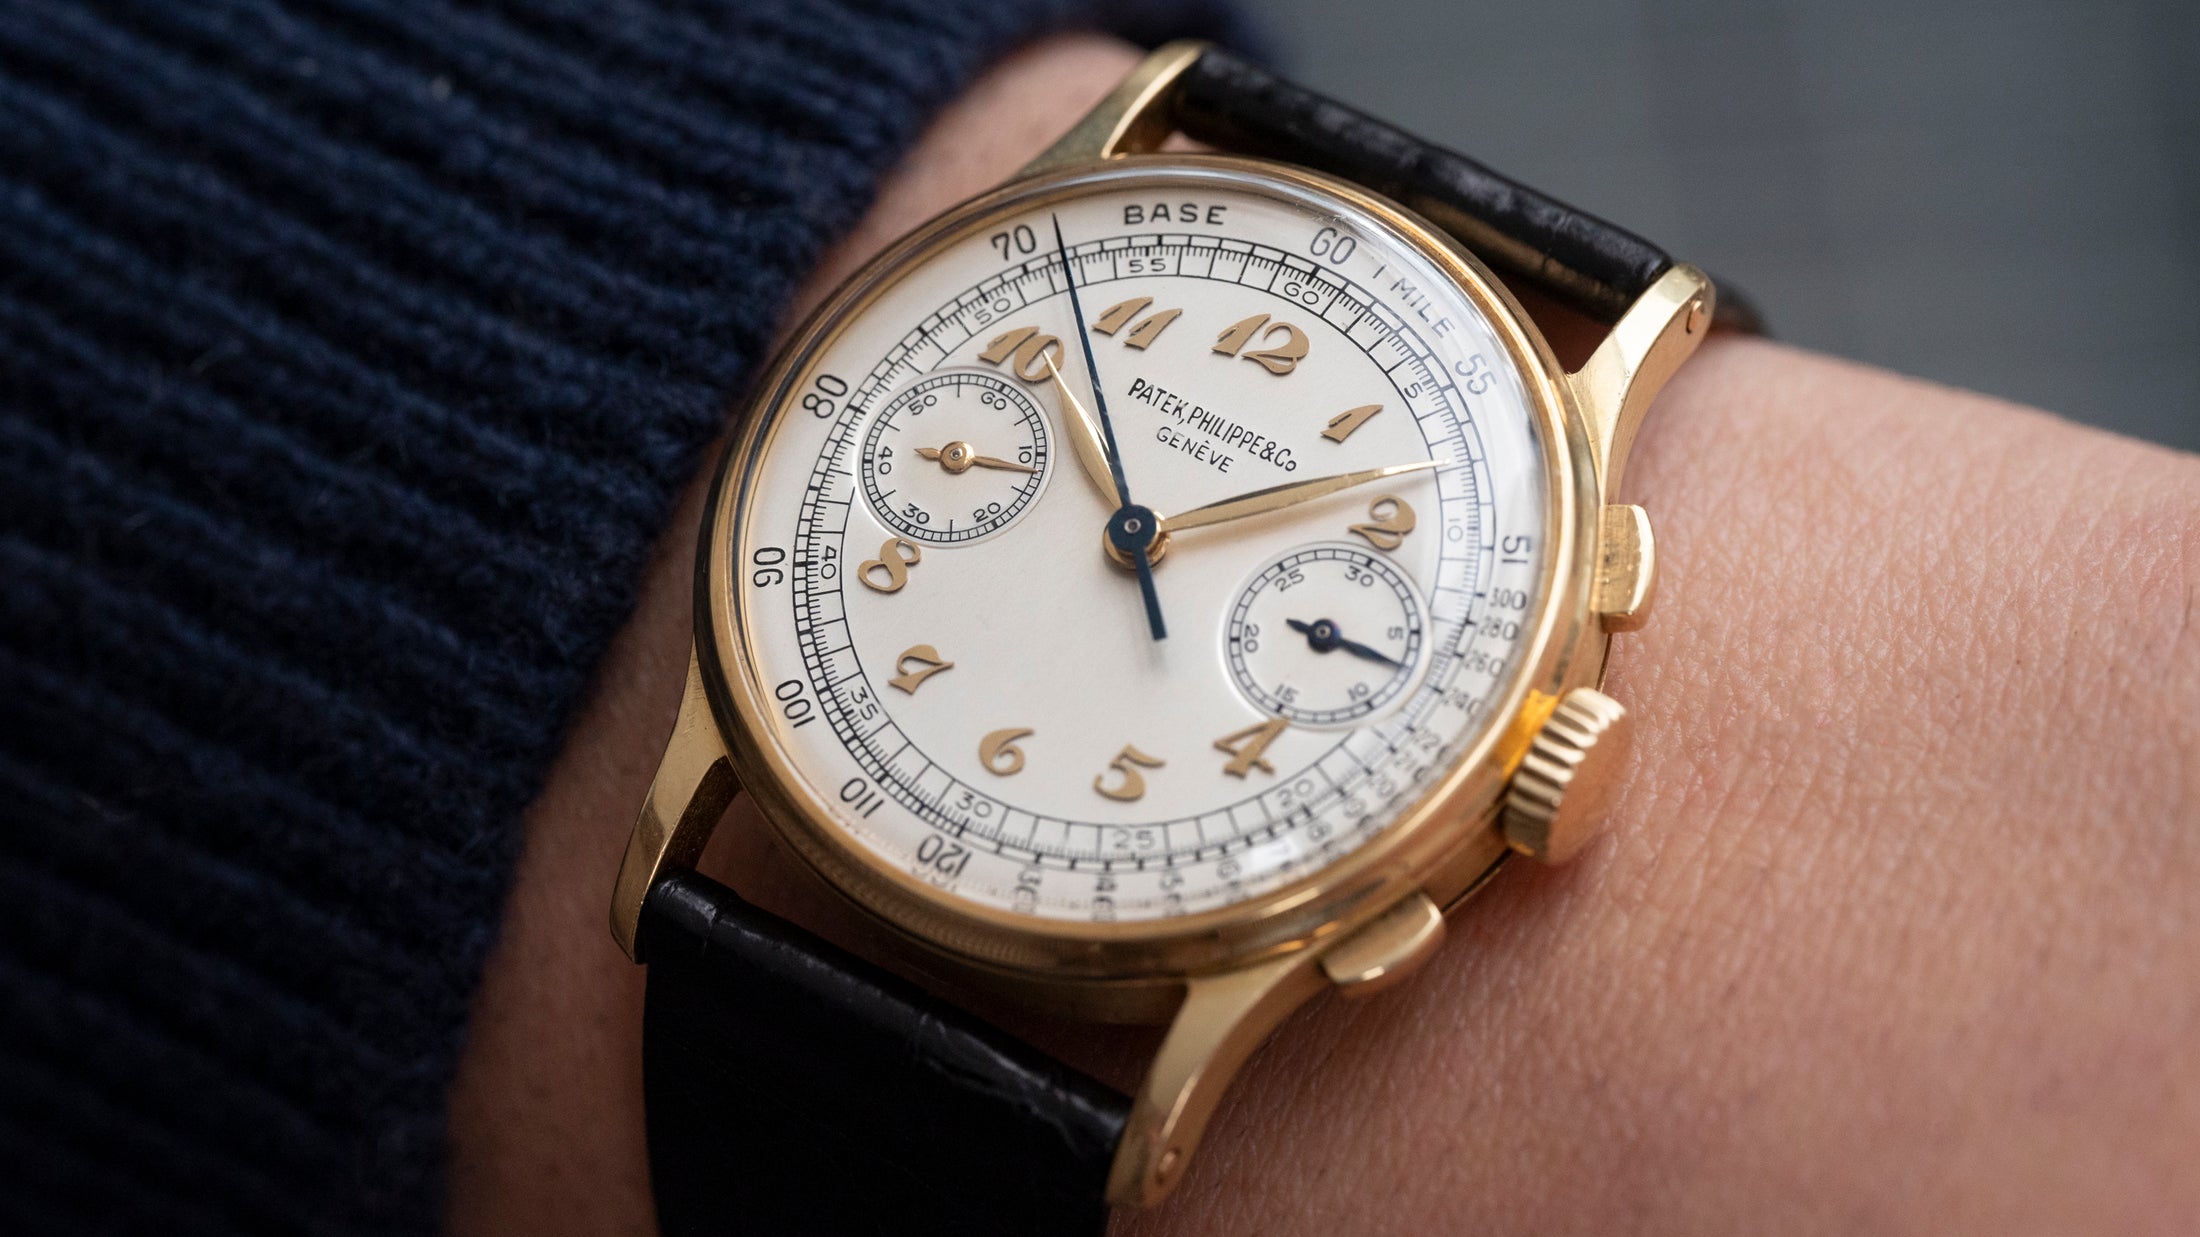 The Patek Philippe Reference 130 Chronograph